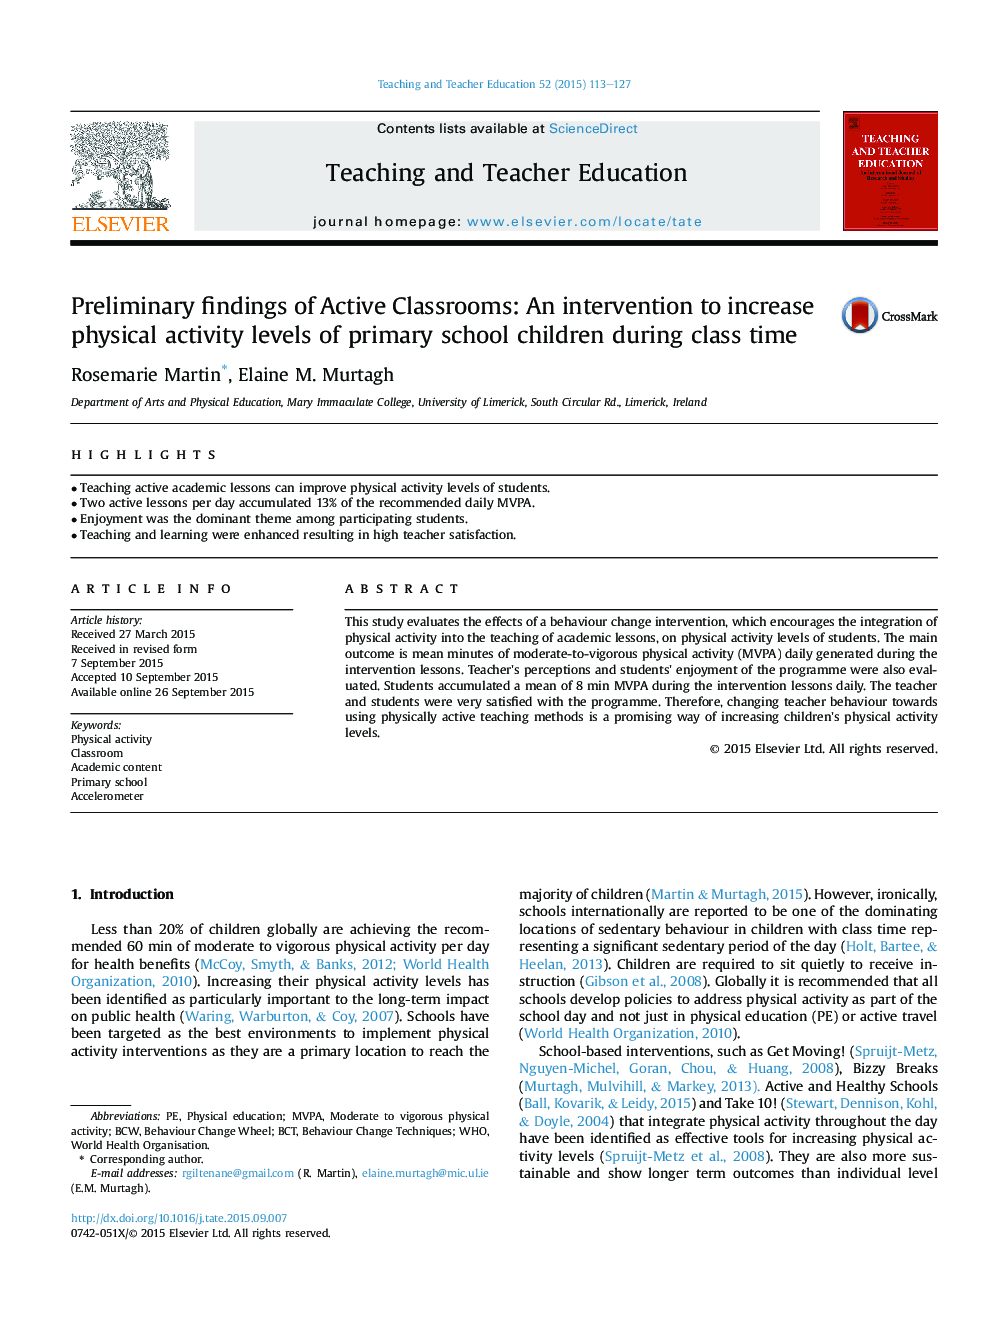 Preliminary findings of Active Classrooms: An intervention to increase physical activity levels of primary school children during class time